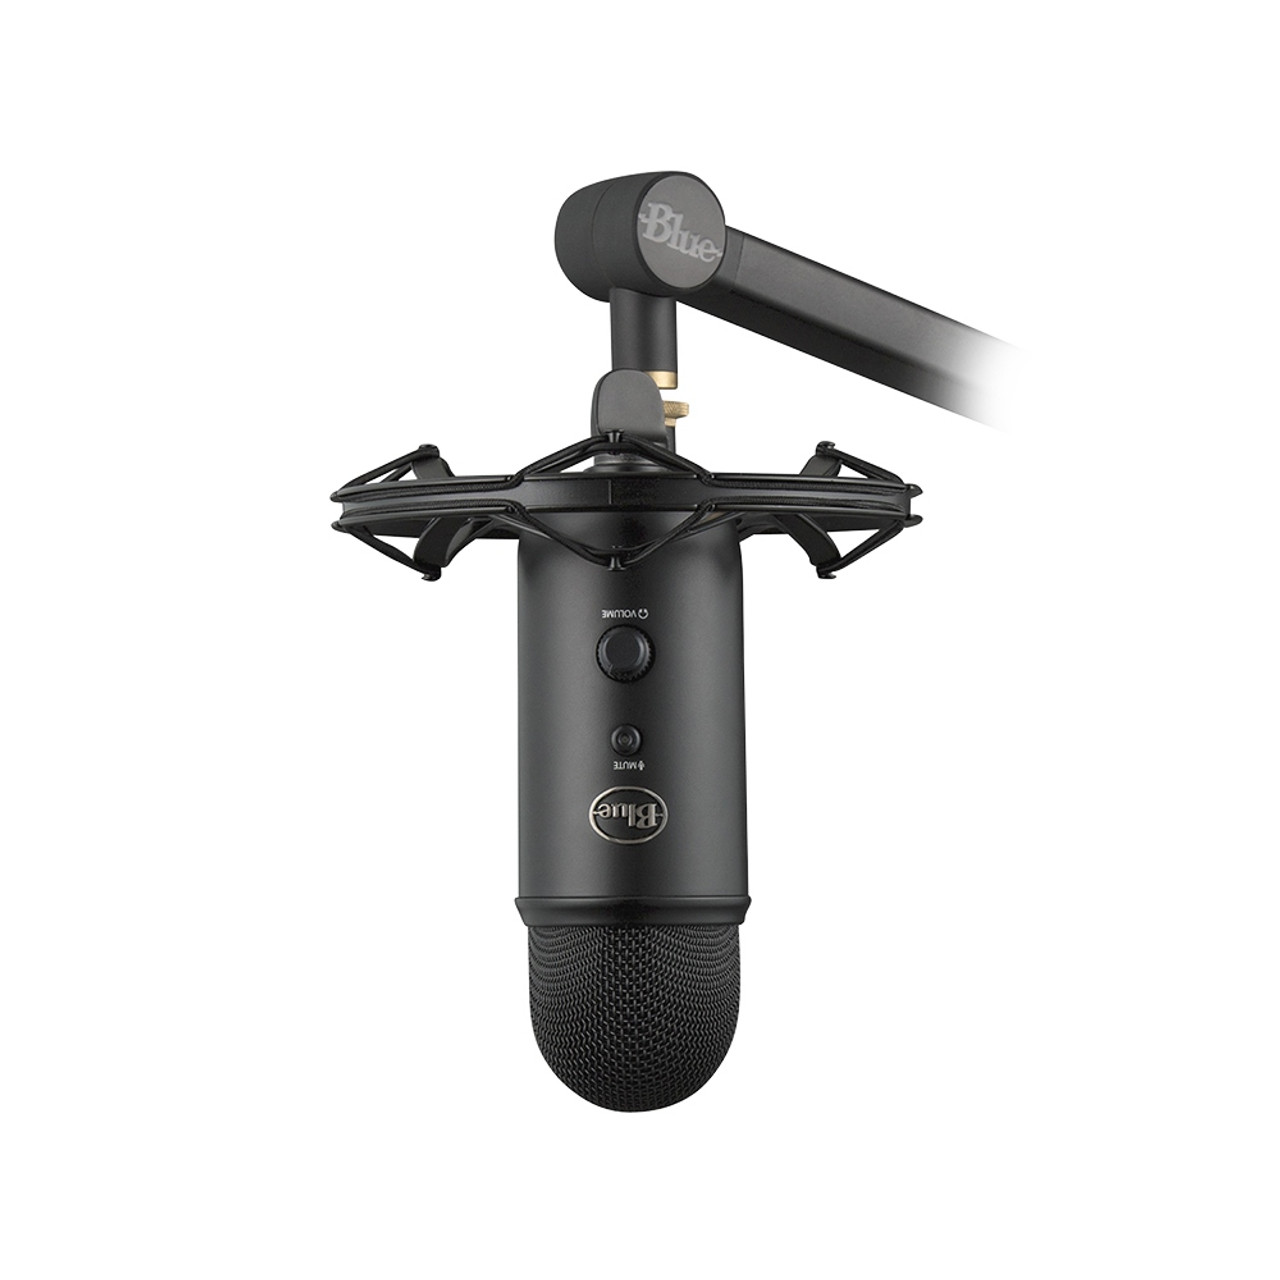 Yeticaster Pro Streaming Microphone Bundle